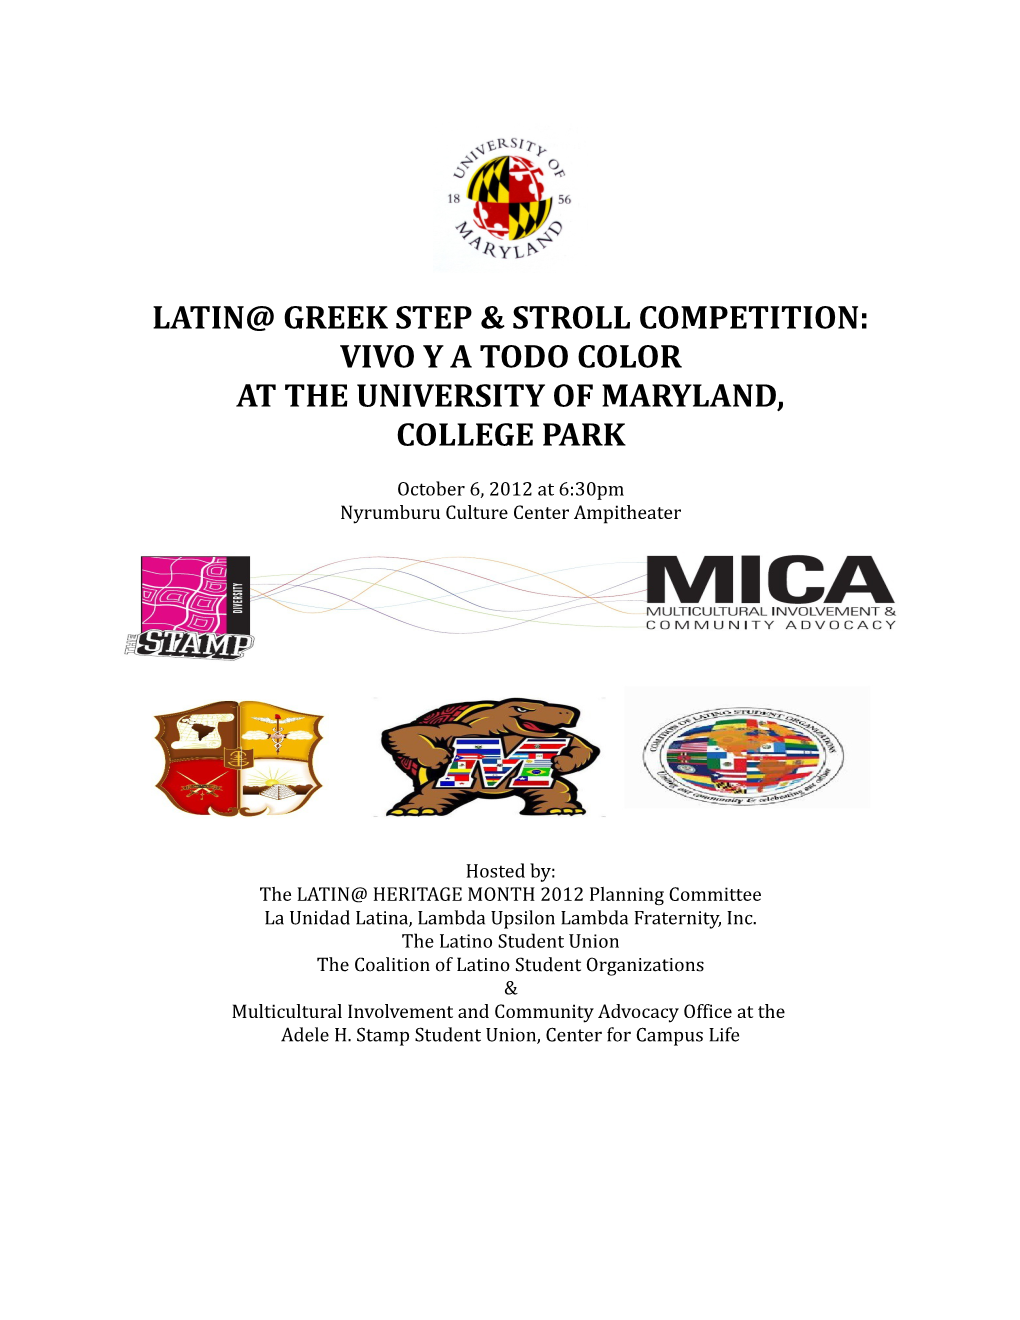 Latin Greek Step & Stroll Competition